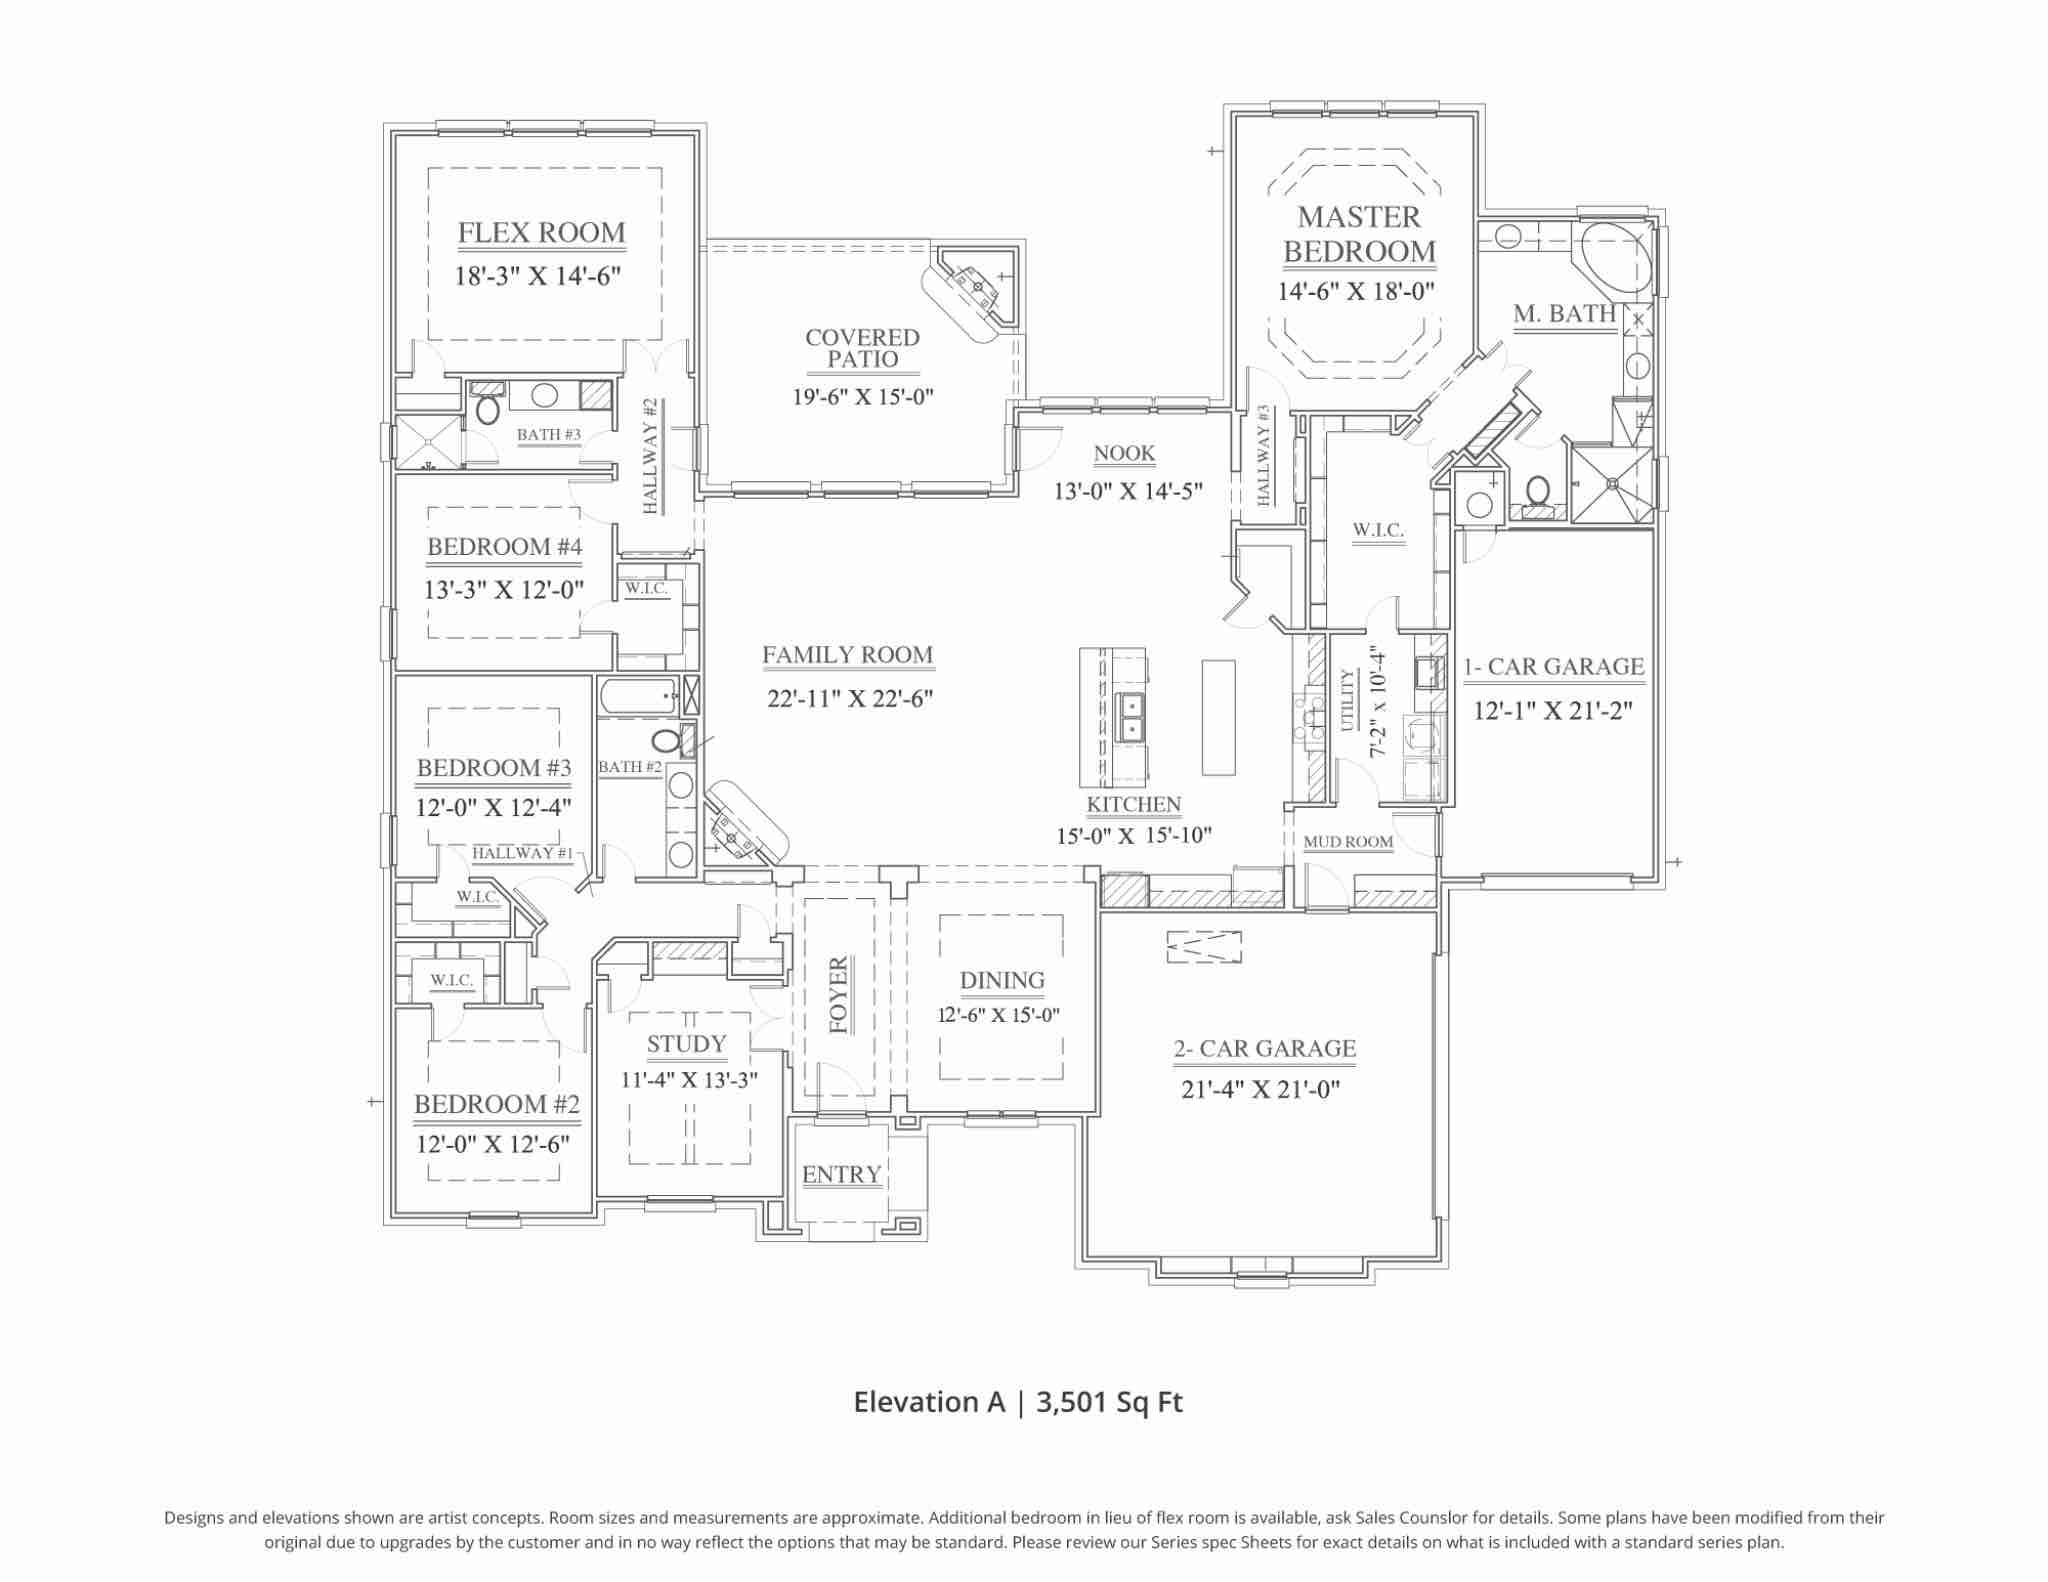 Our Country Homes Floor Plan in the Montclair